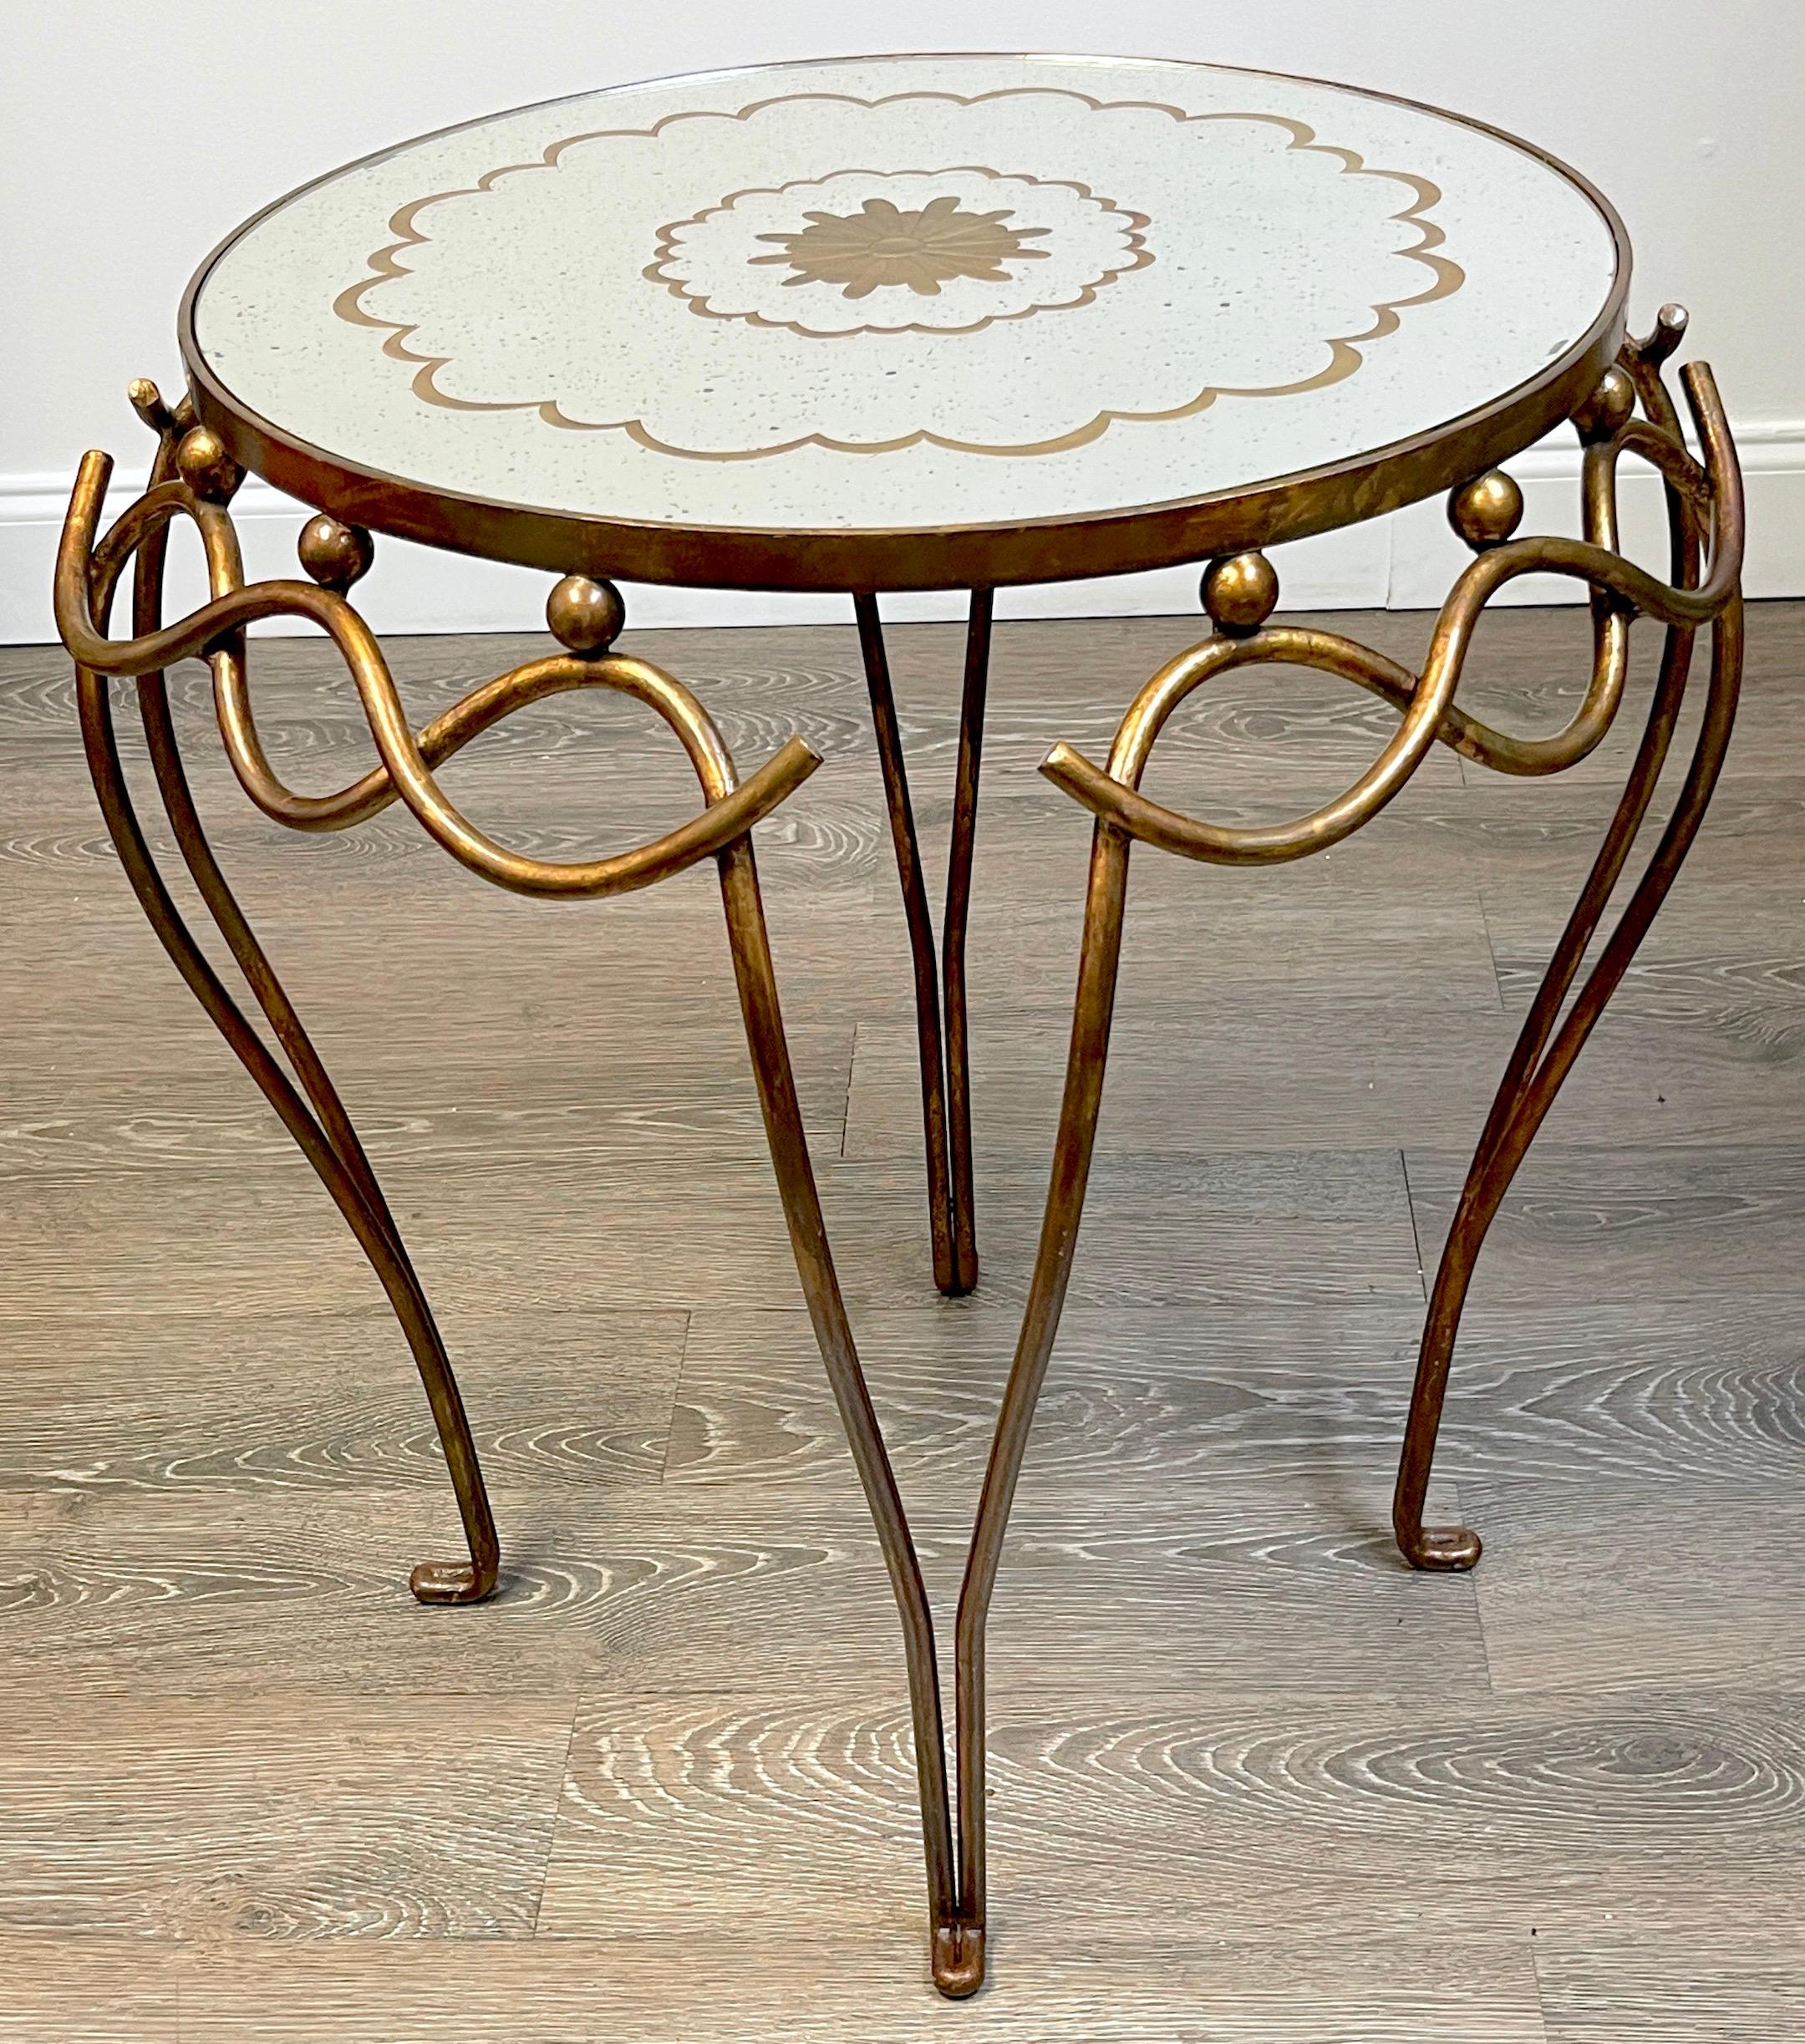 French Modern Gilt & Patinated Verre Églomisé Side Table, Style of René Drouet In Good Condition For Sale In West Palm Beach, FL